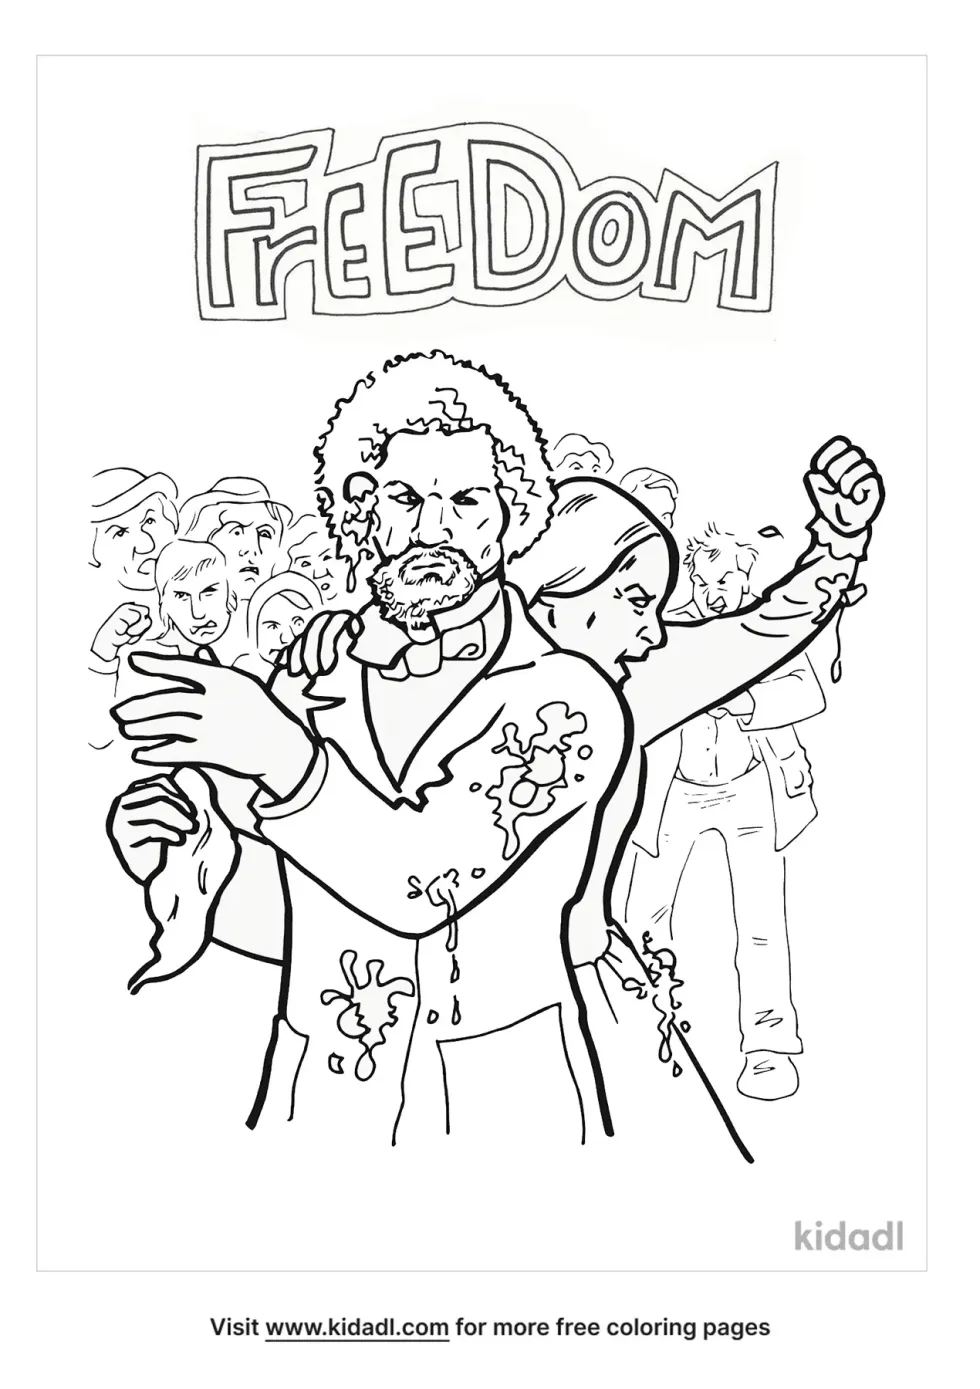 People Who Got Freedom Coloring Page